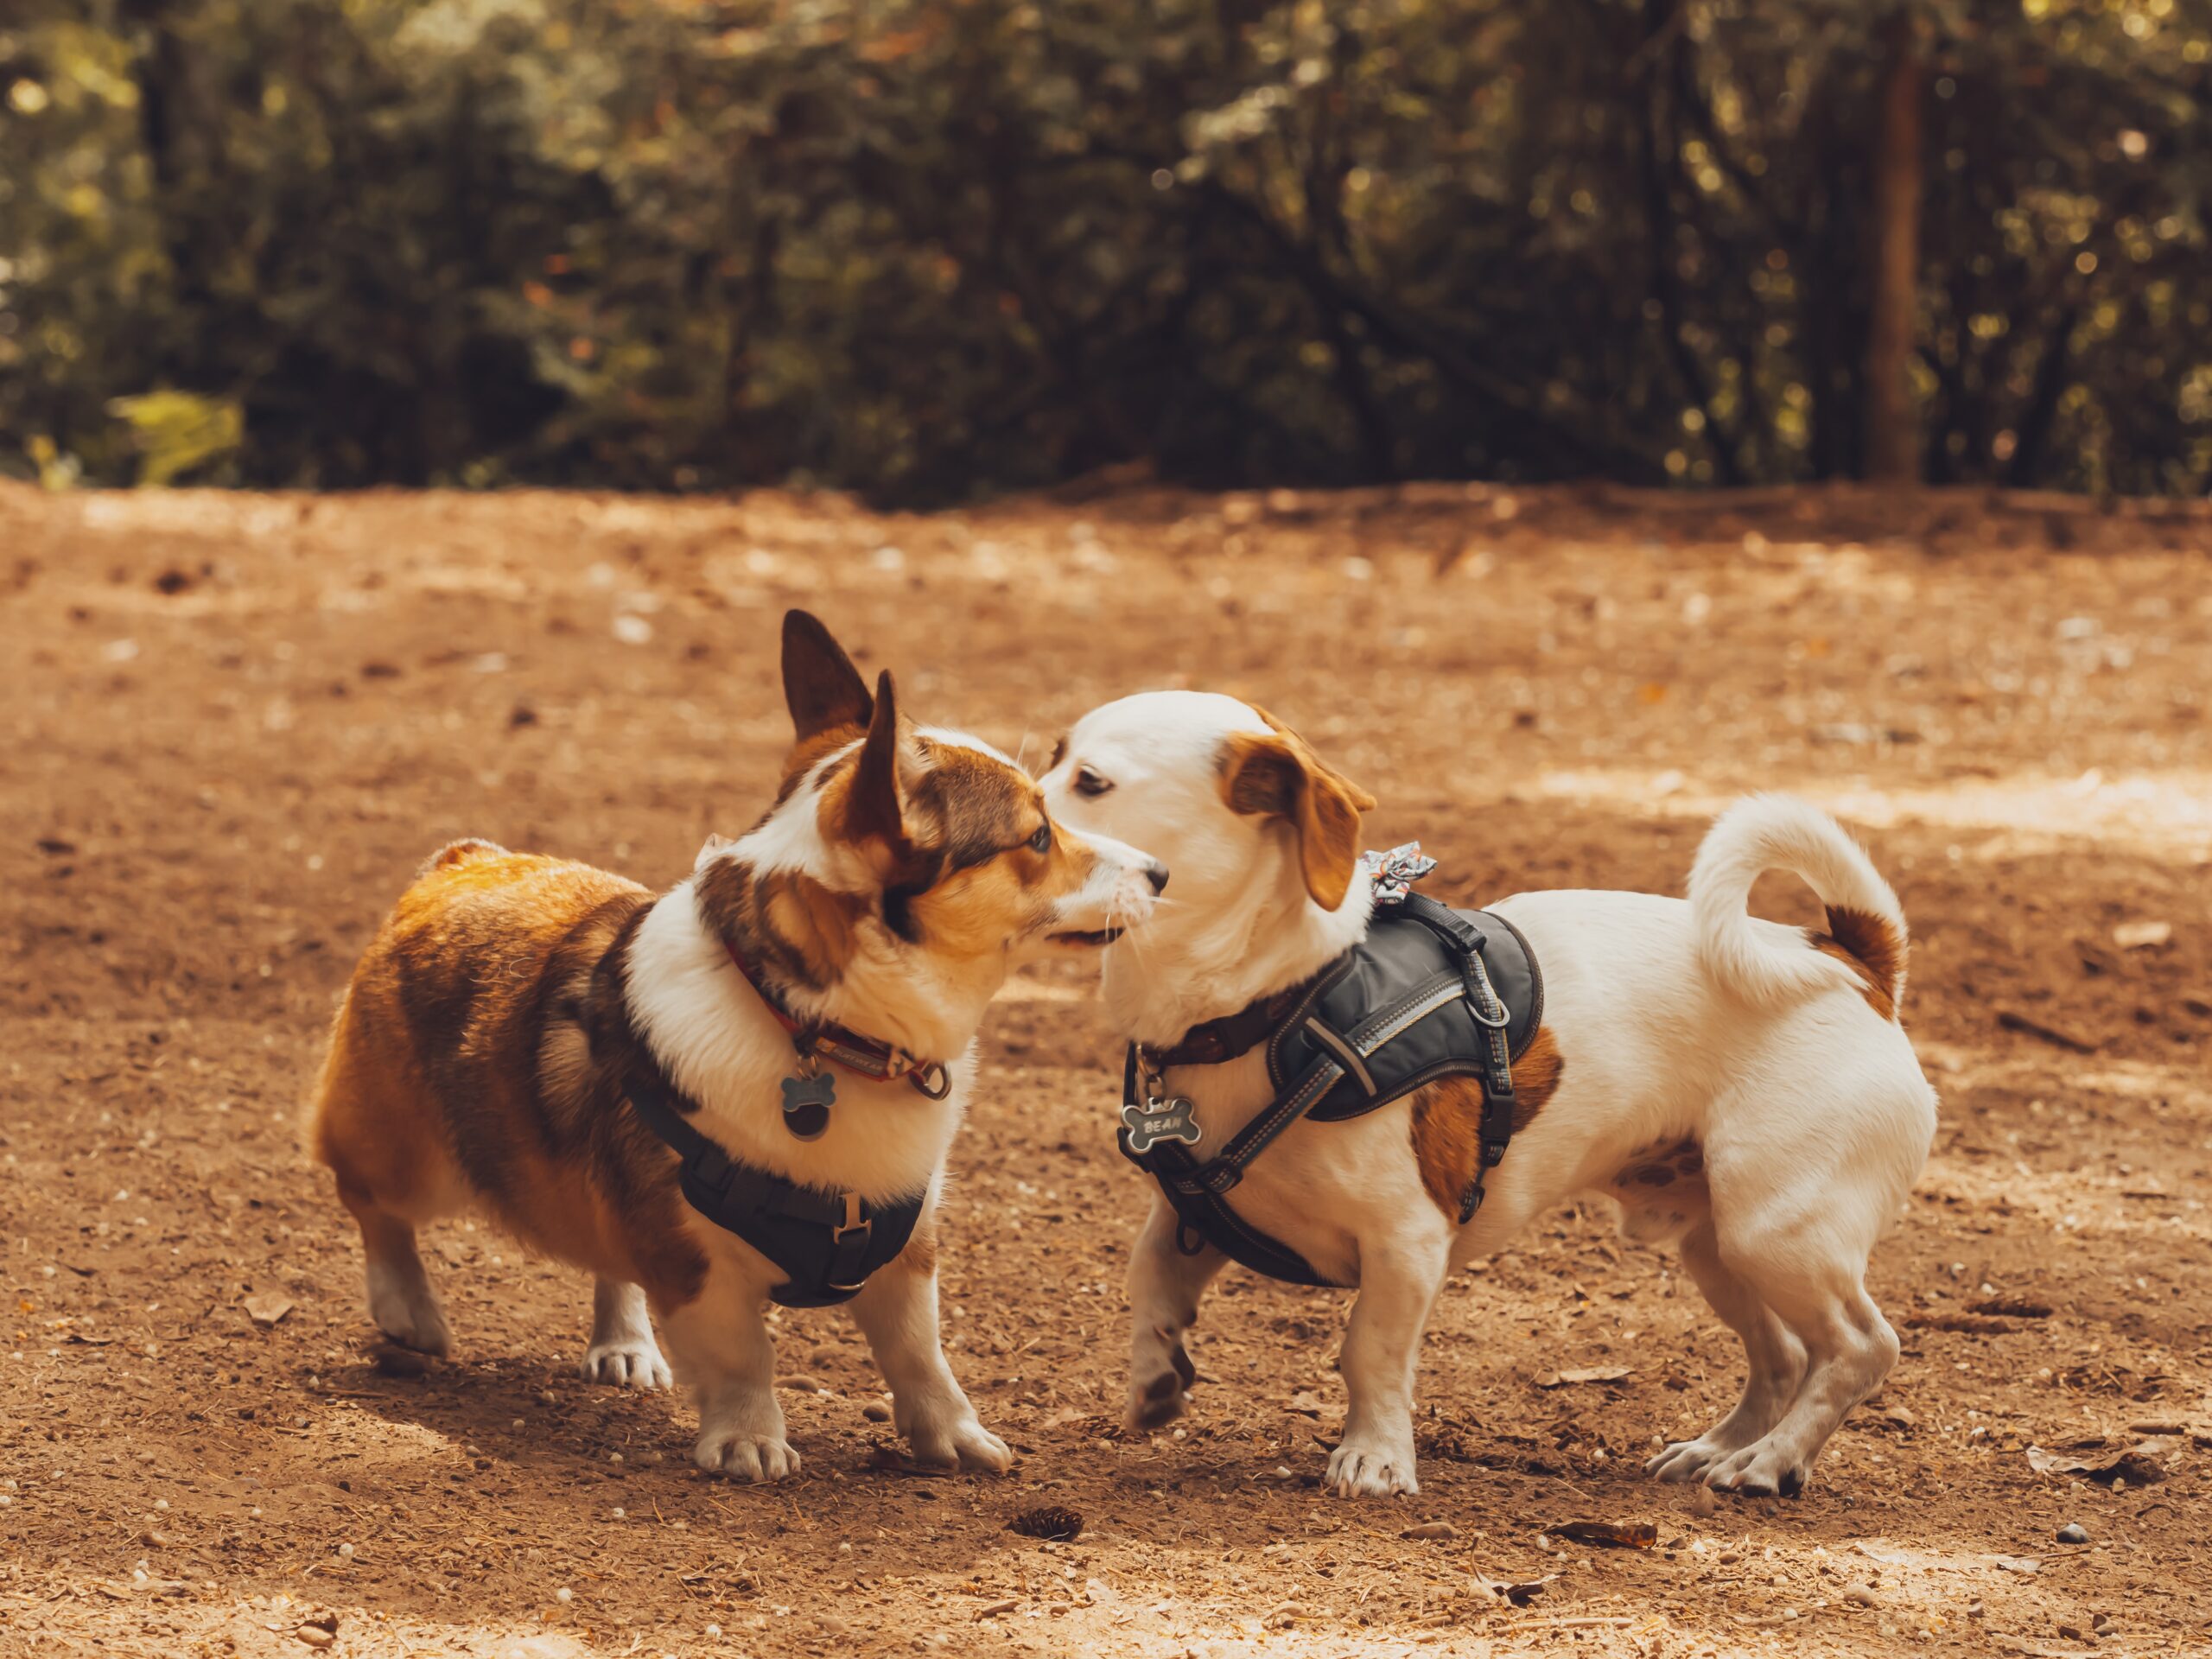 Two small dogs sniffing each other